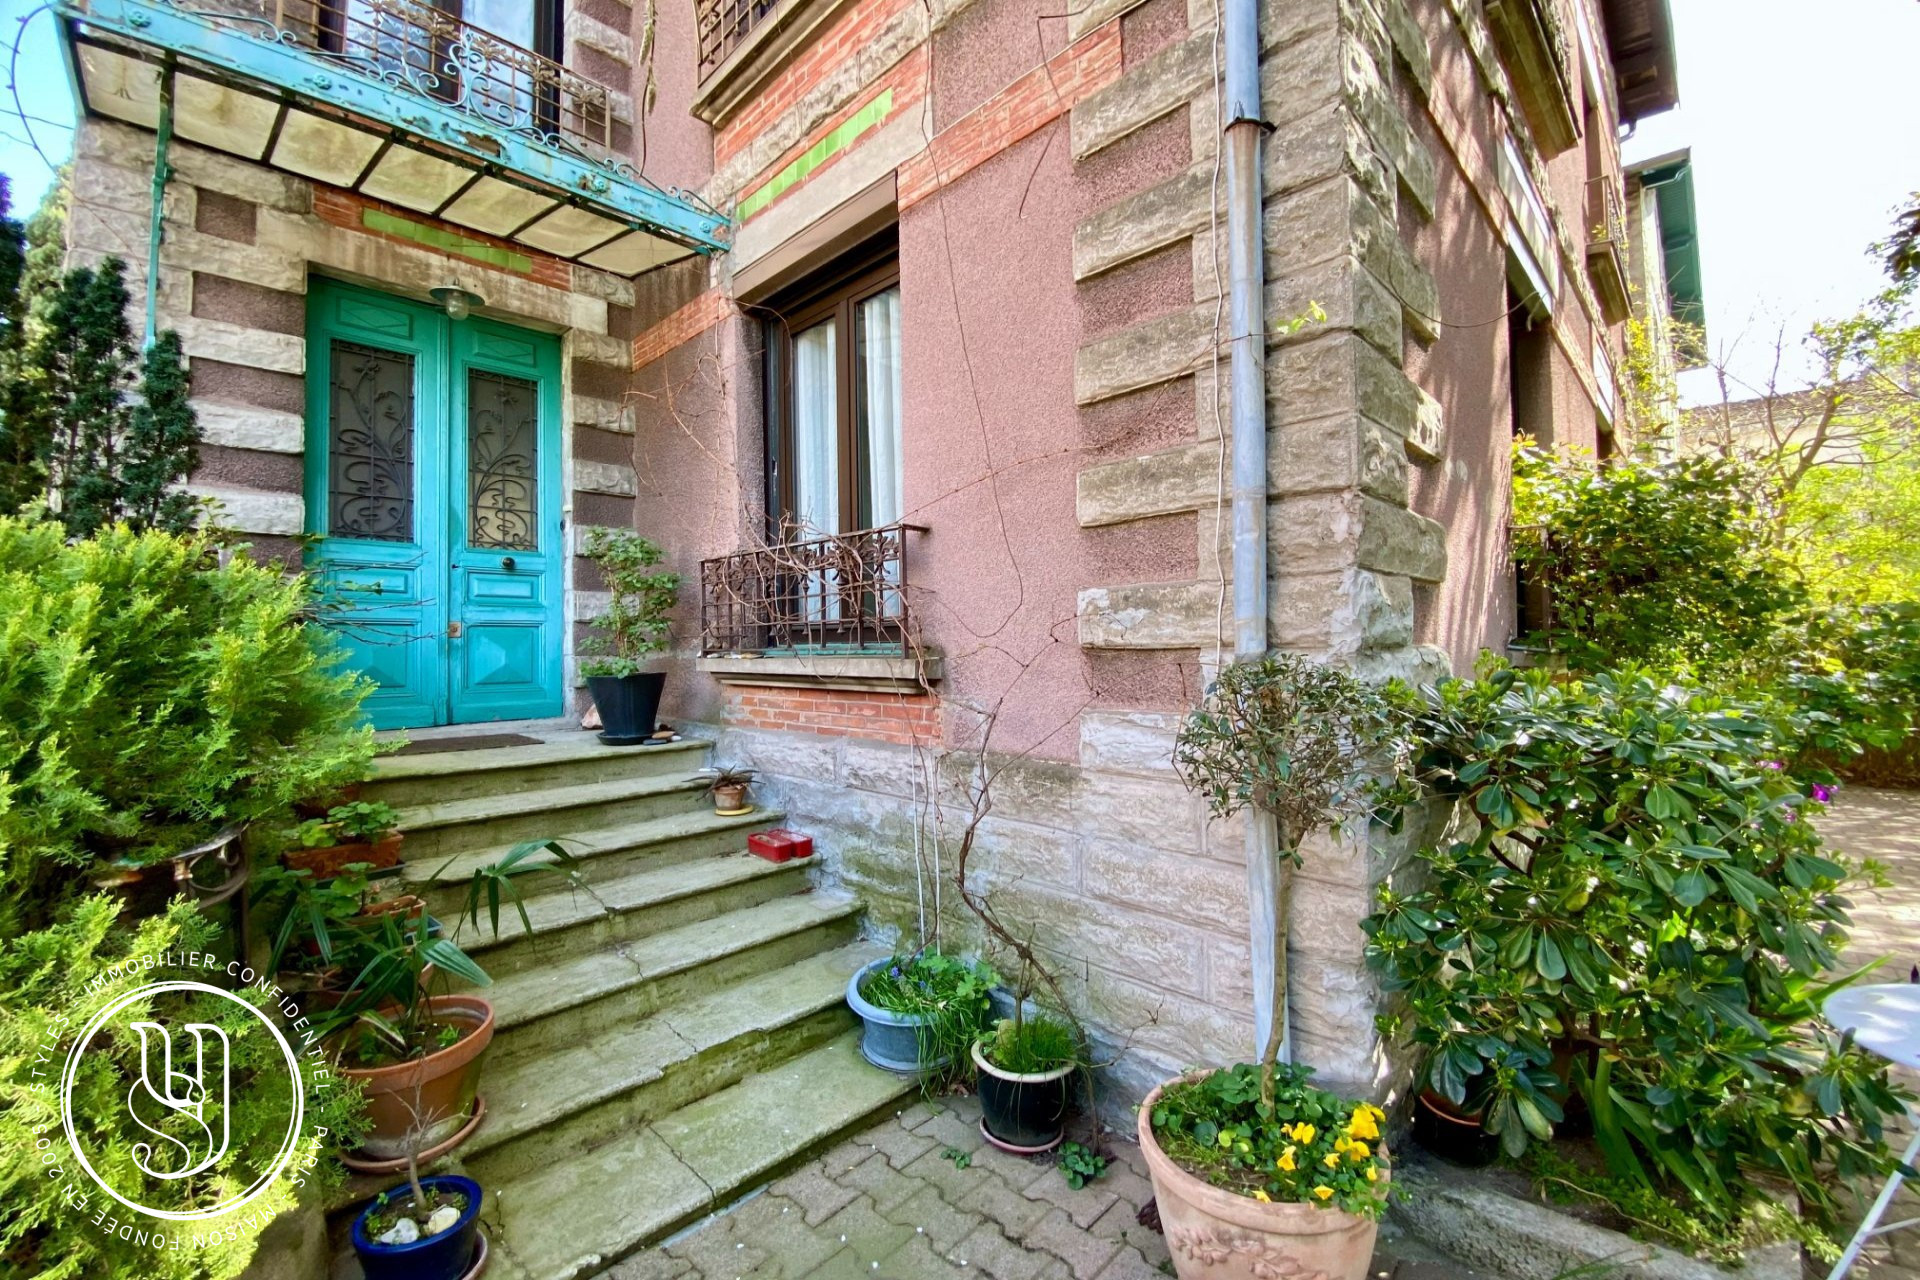 Toulouse - Under offer - A charming bourgeois house with garden and garag - image 1